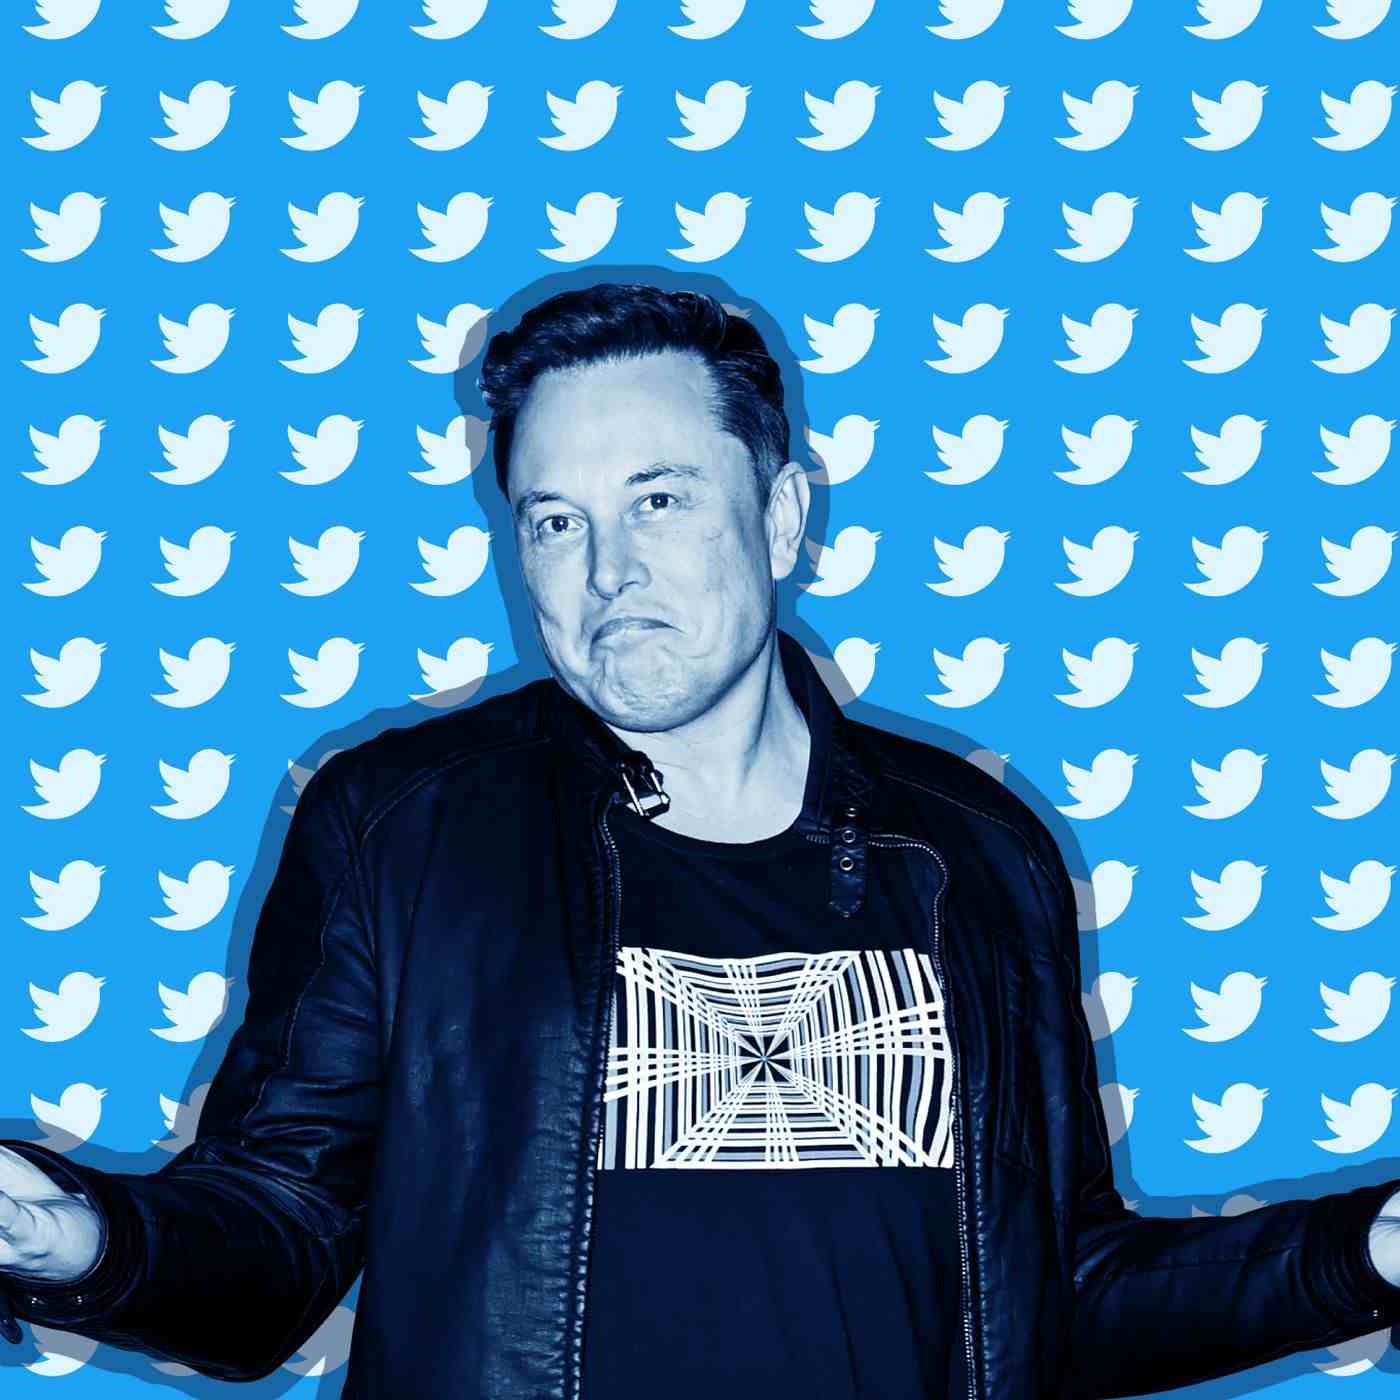 According to Twitter, there is no way for Elon Musk to back out of his agreement to purchase Twitter